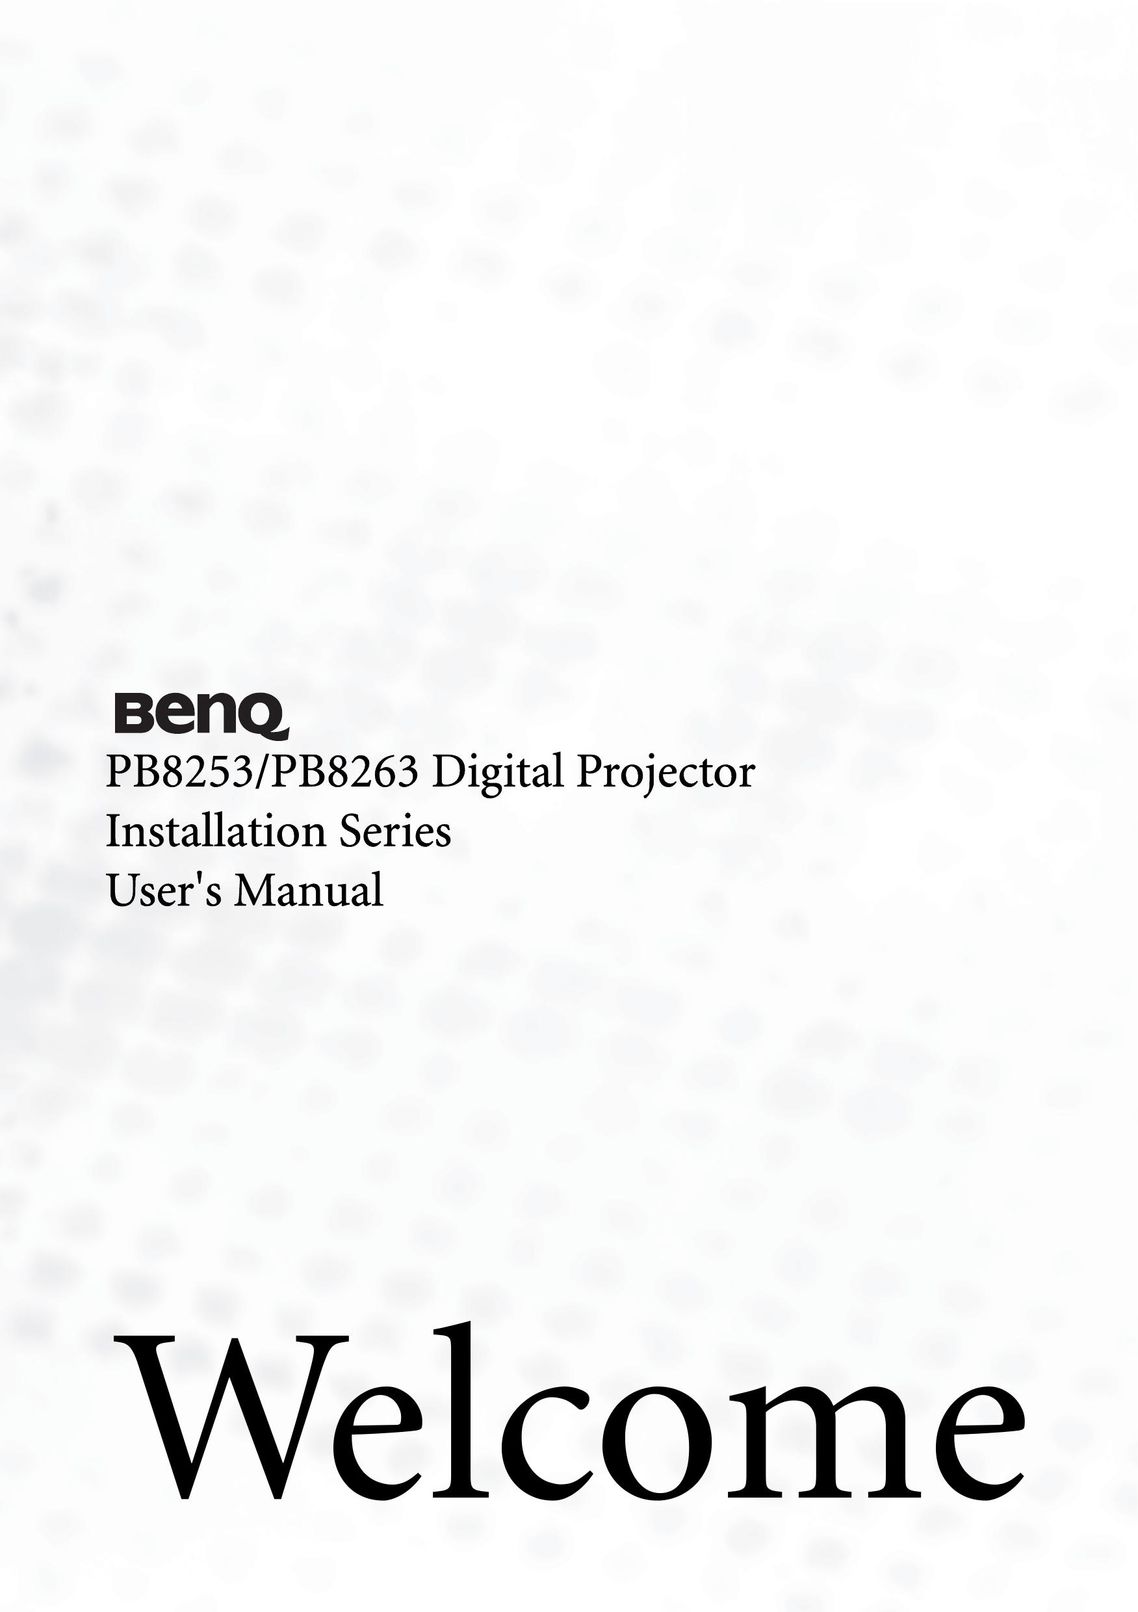 BenQ PB8253 Projection Television User Manual